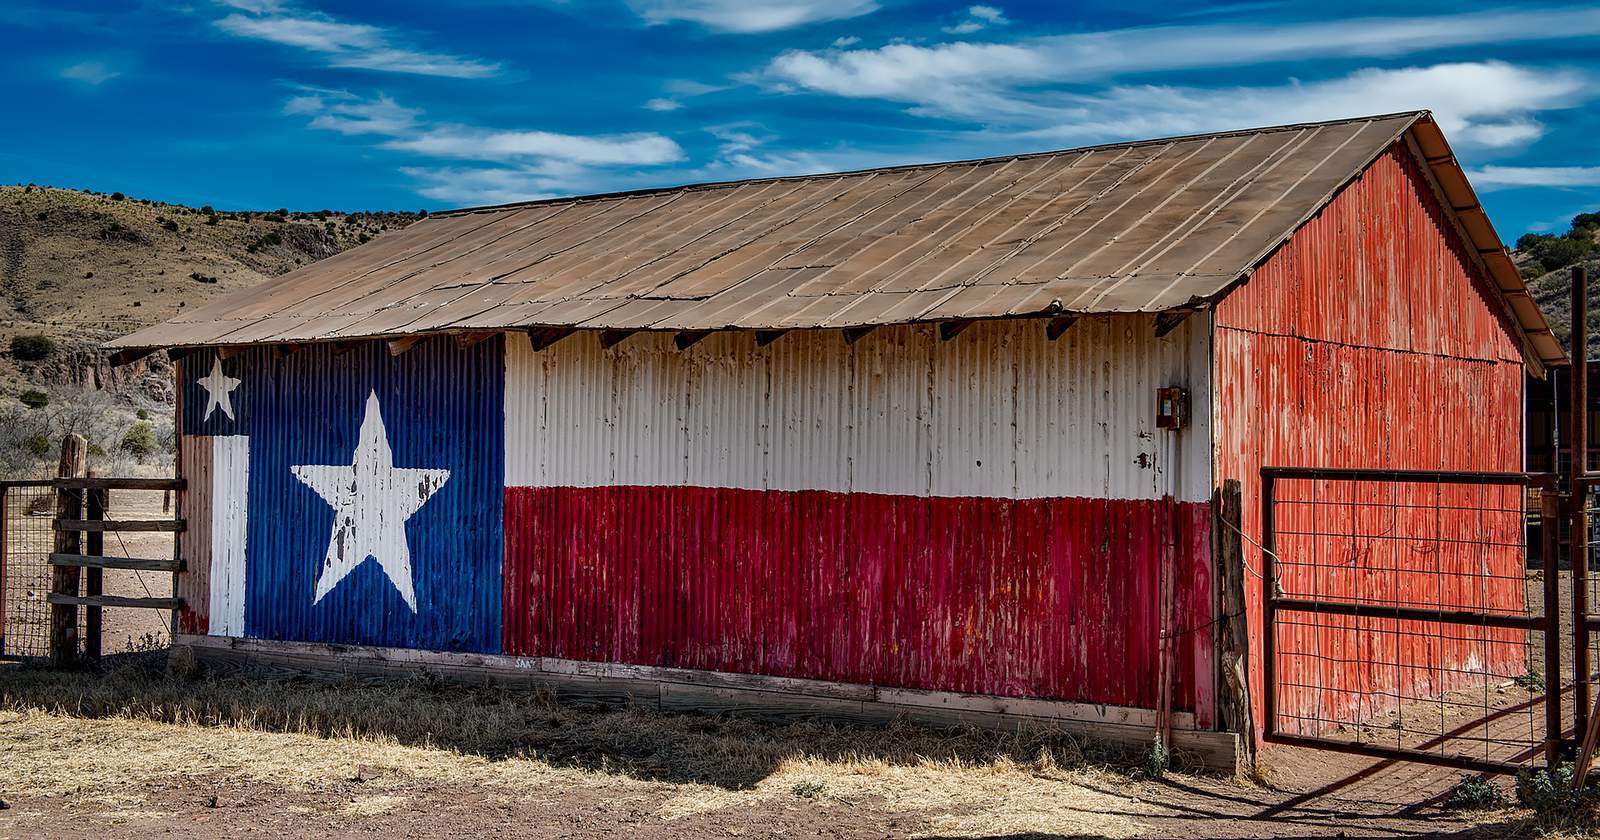 STUDY: Rural land sales in Texas jumped to record $1.69B during pandemic